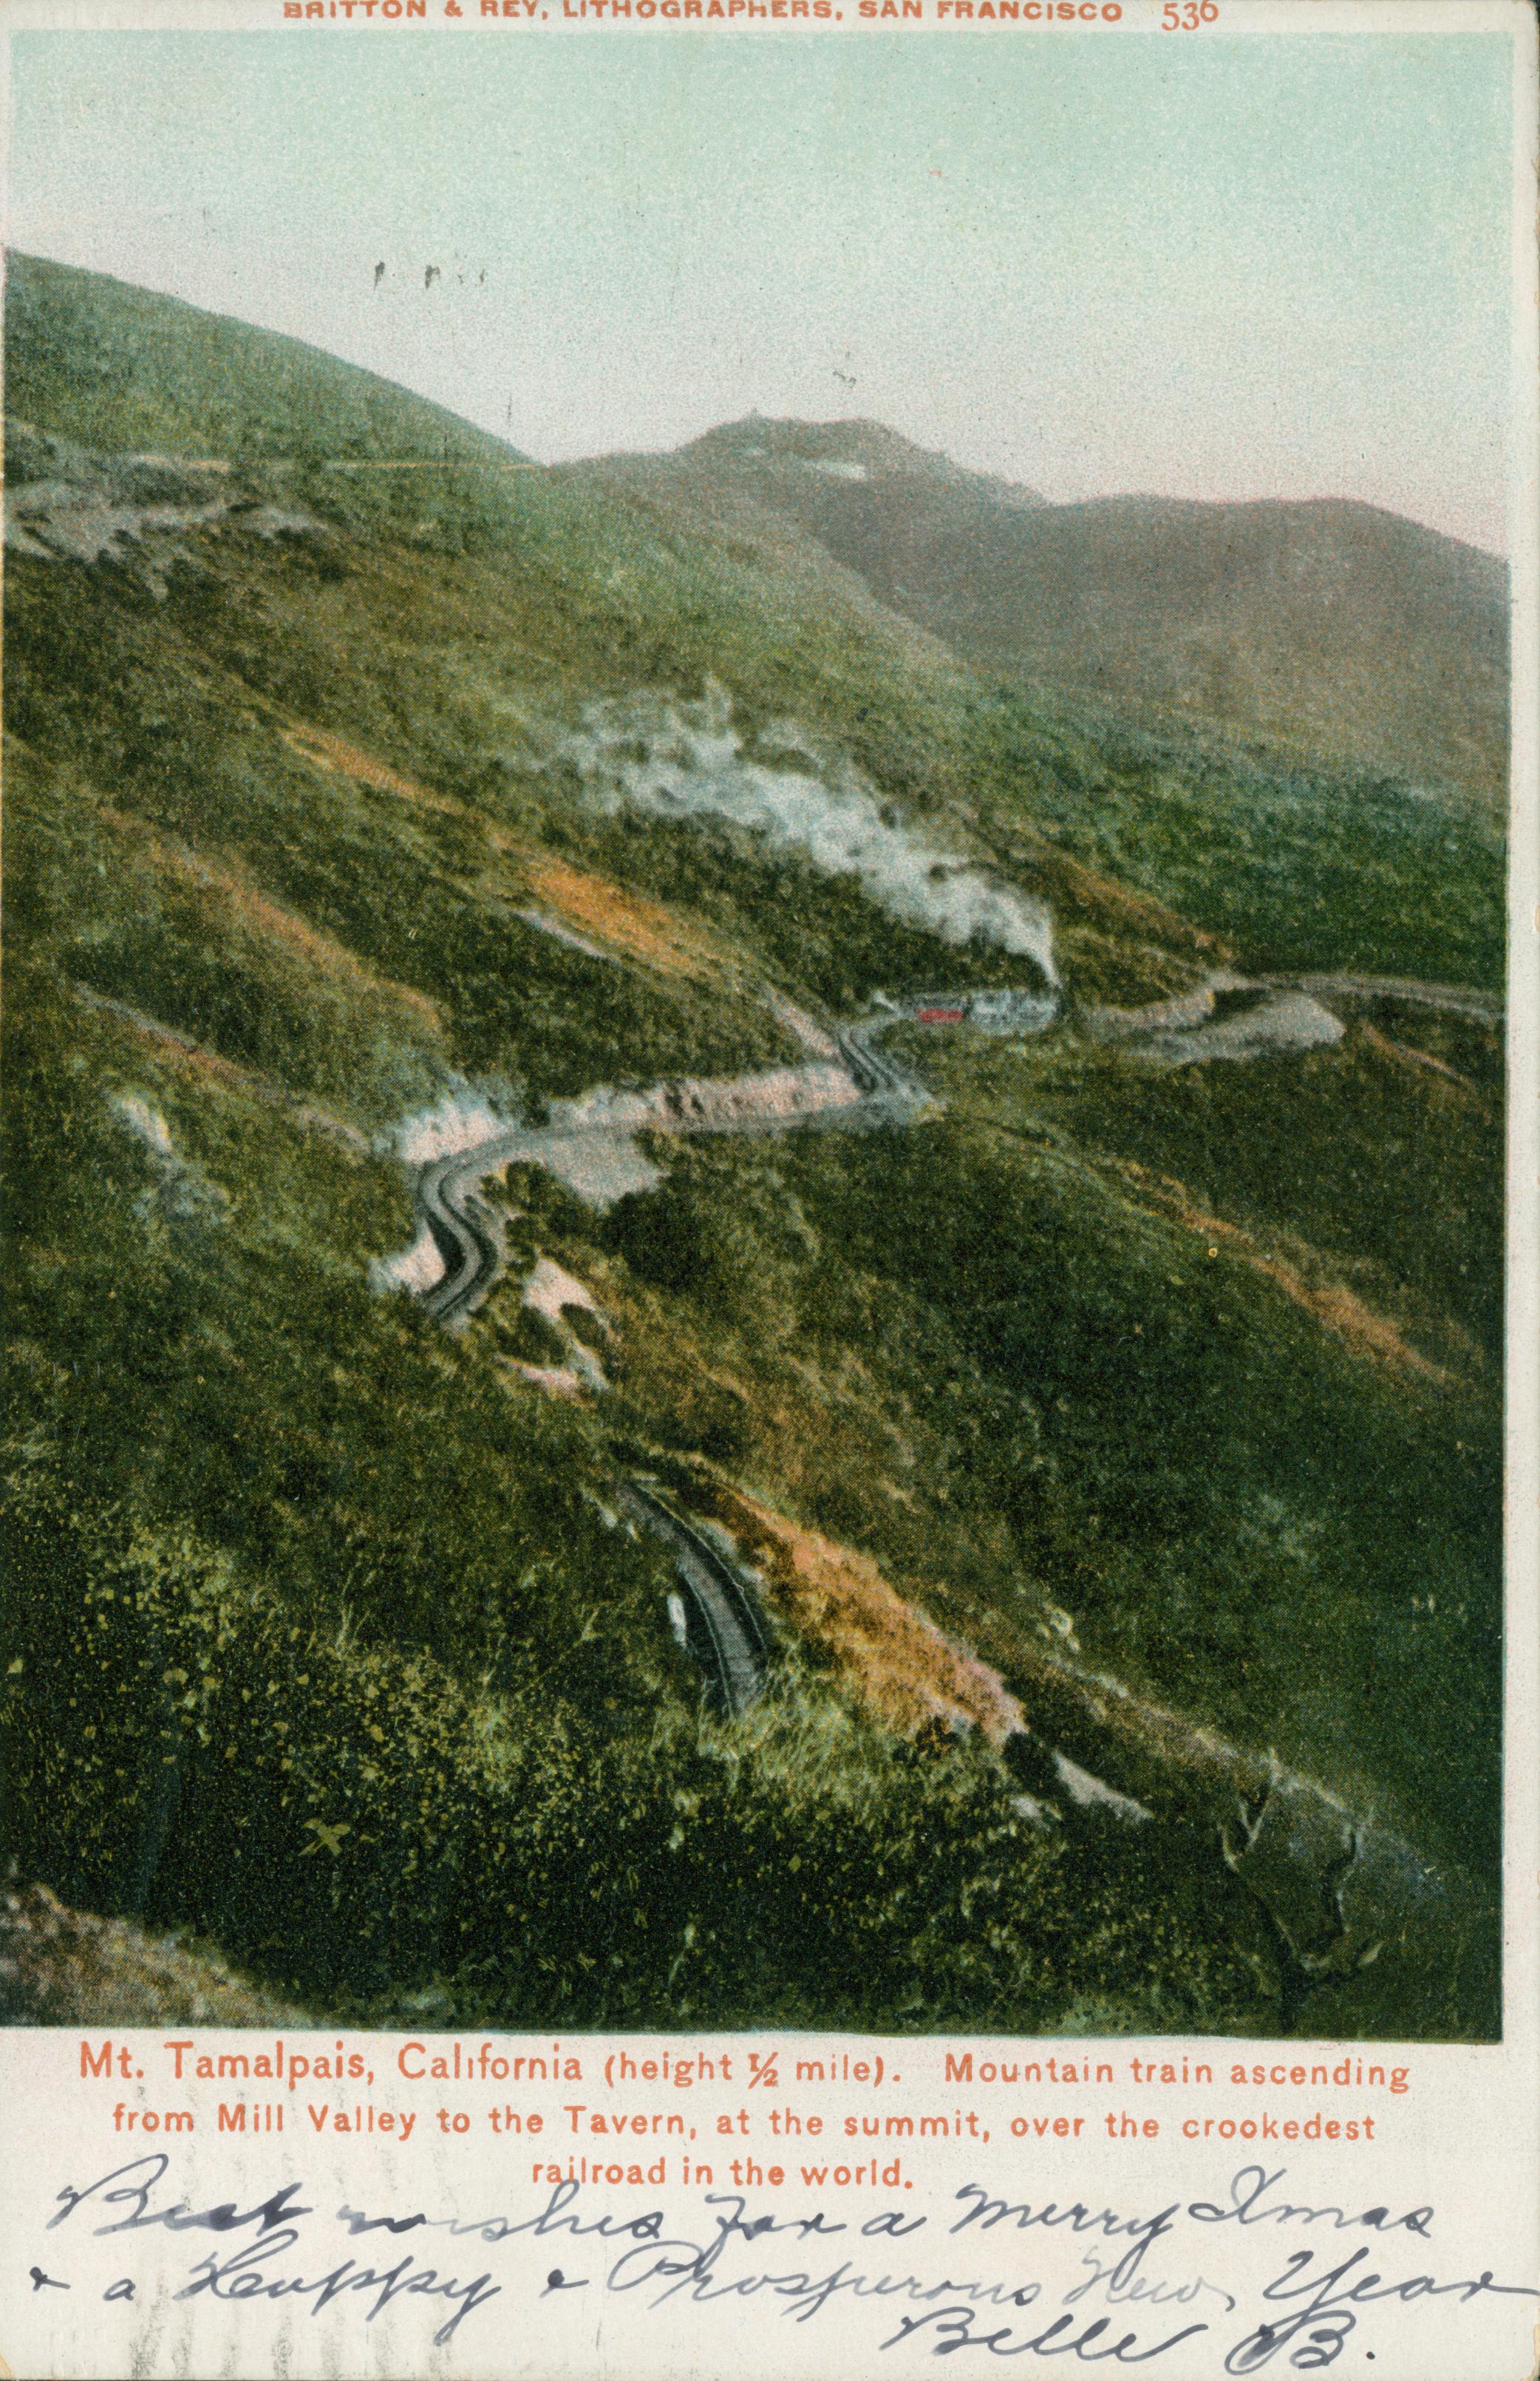 Steam engine traveling along mountainside, lots of steam from engine, rolling green mountainside